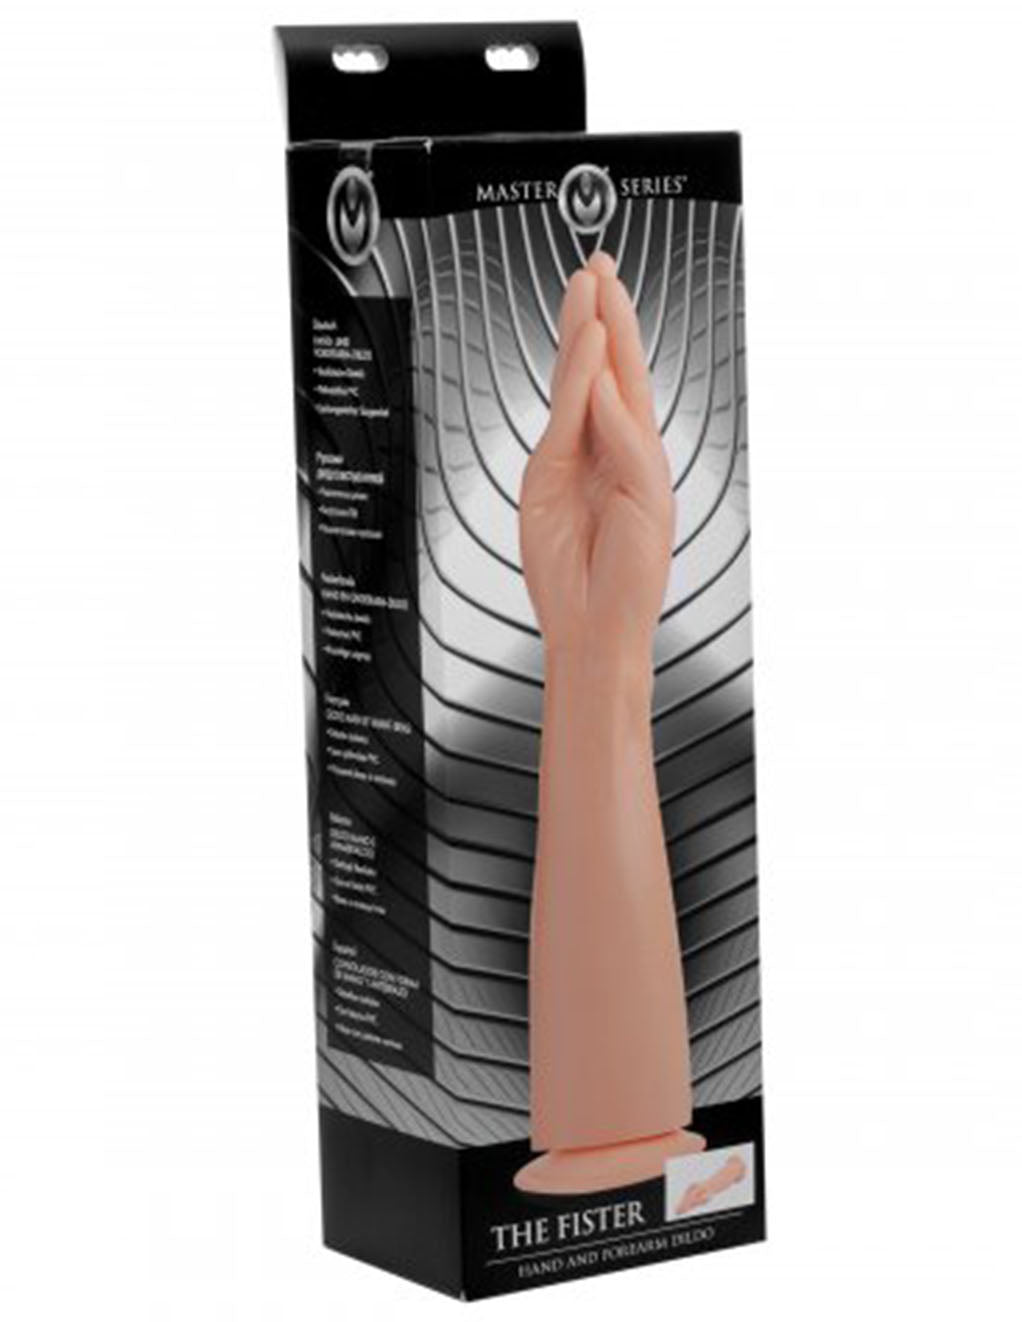 Master Series The Fister Hand and Forearm Dildo- package